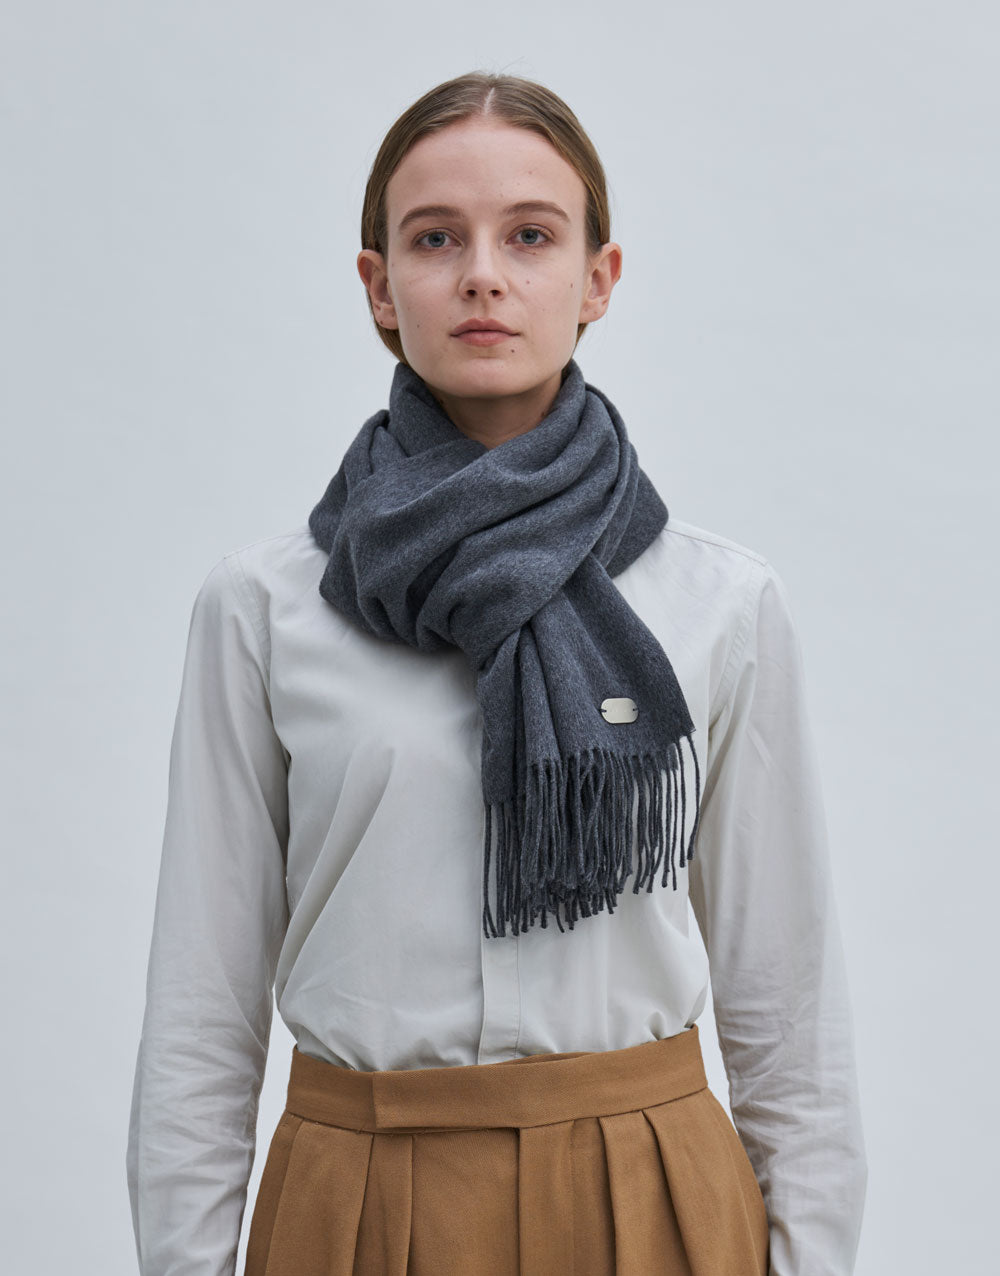 Pre-order sales: <br>100% Silk Scarf_Gray<br>to be shipped from early November